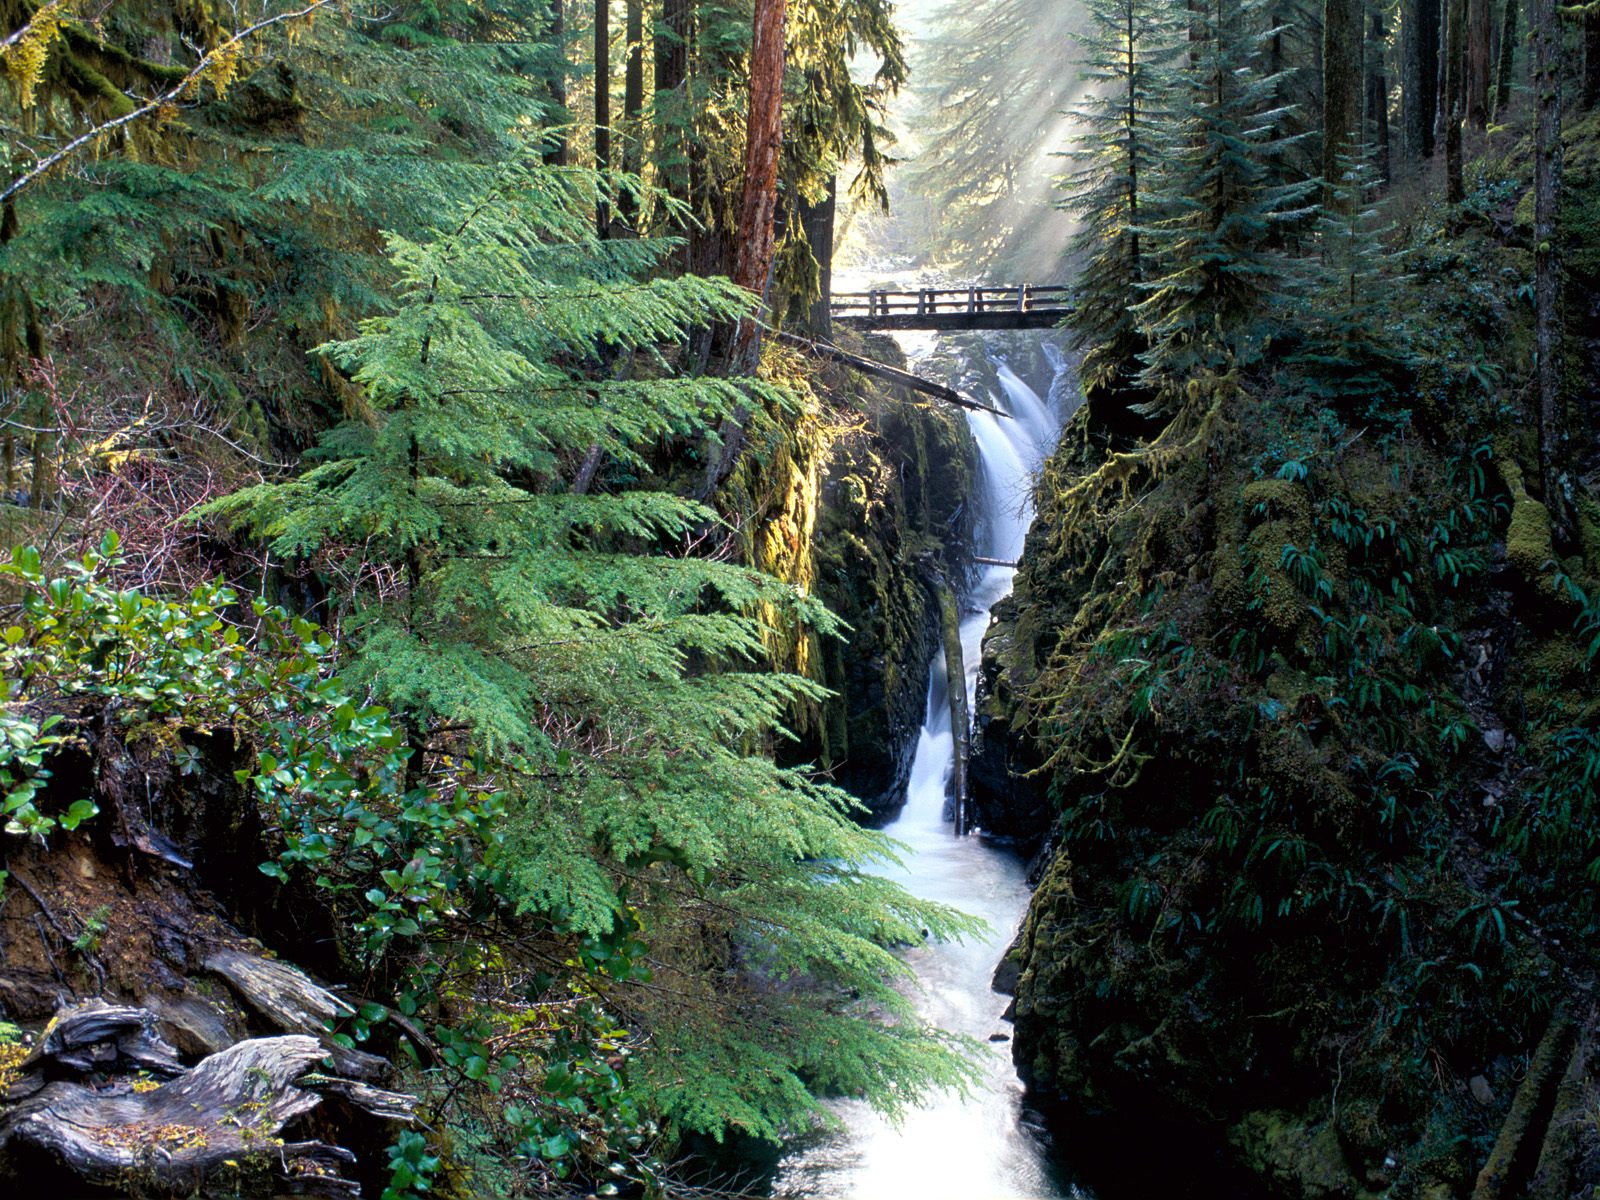 Scenic waterfall cascades over rocky bridge amidst lush forest with tall trees.